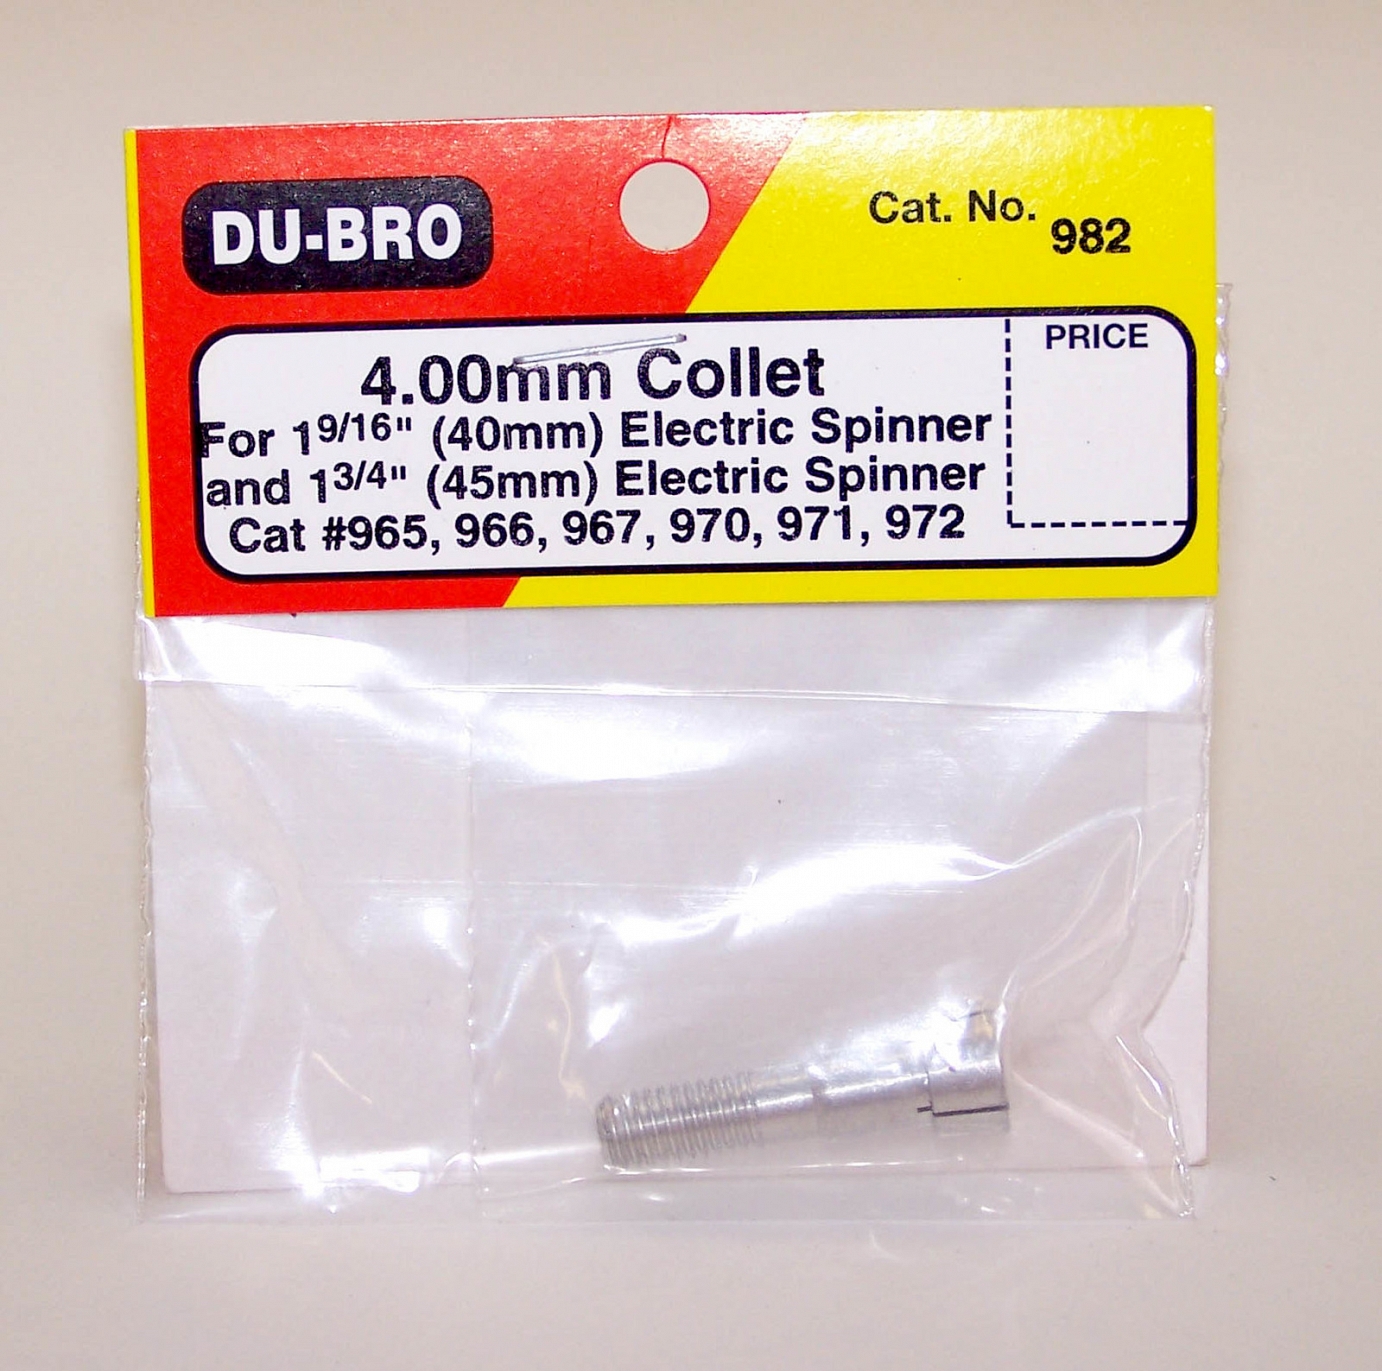 ###DUBRO 982 4.00MM COLLET FOR 1 9/16in & 1 3/4in ELEC SPINNER (